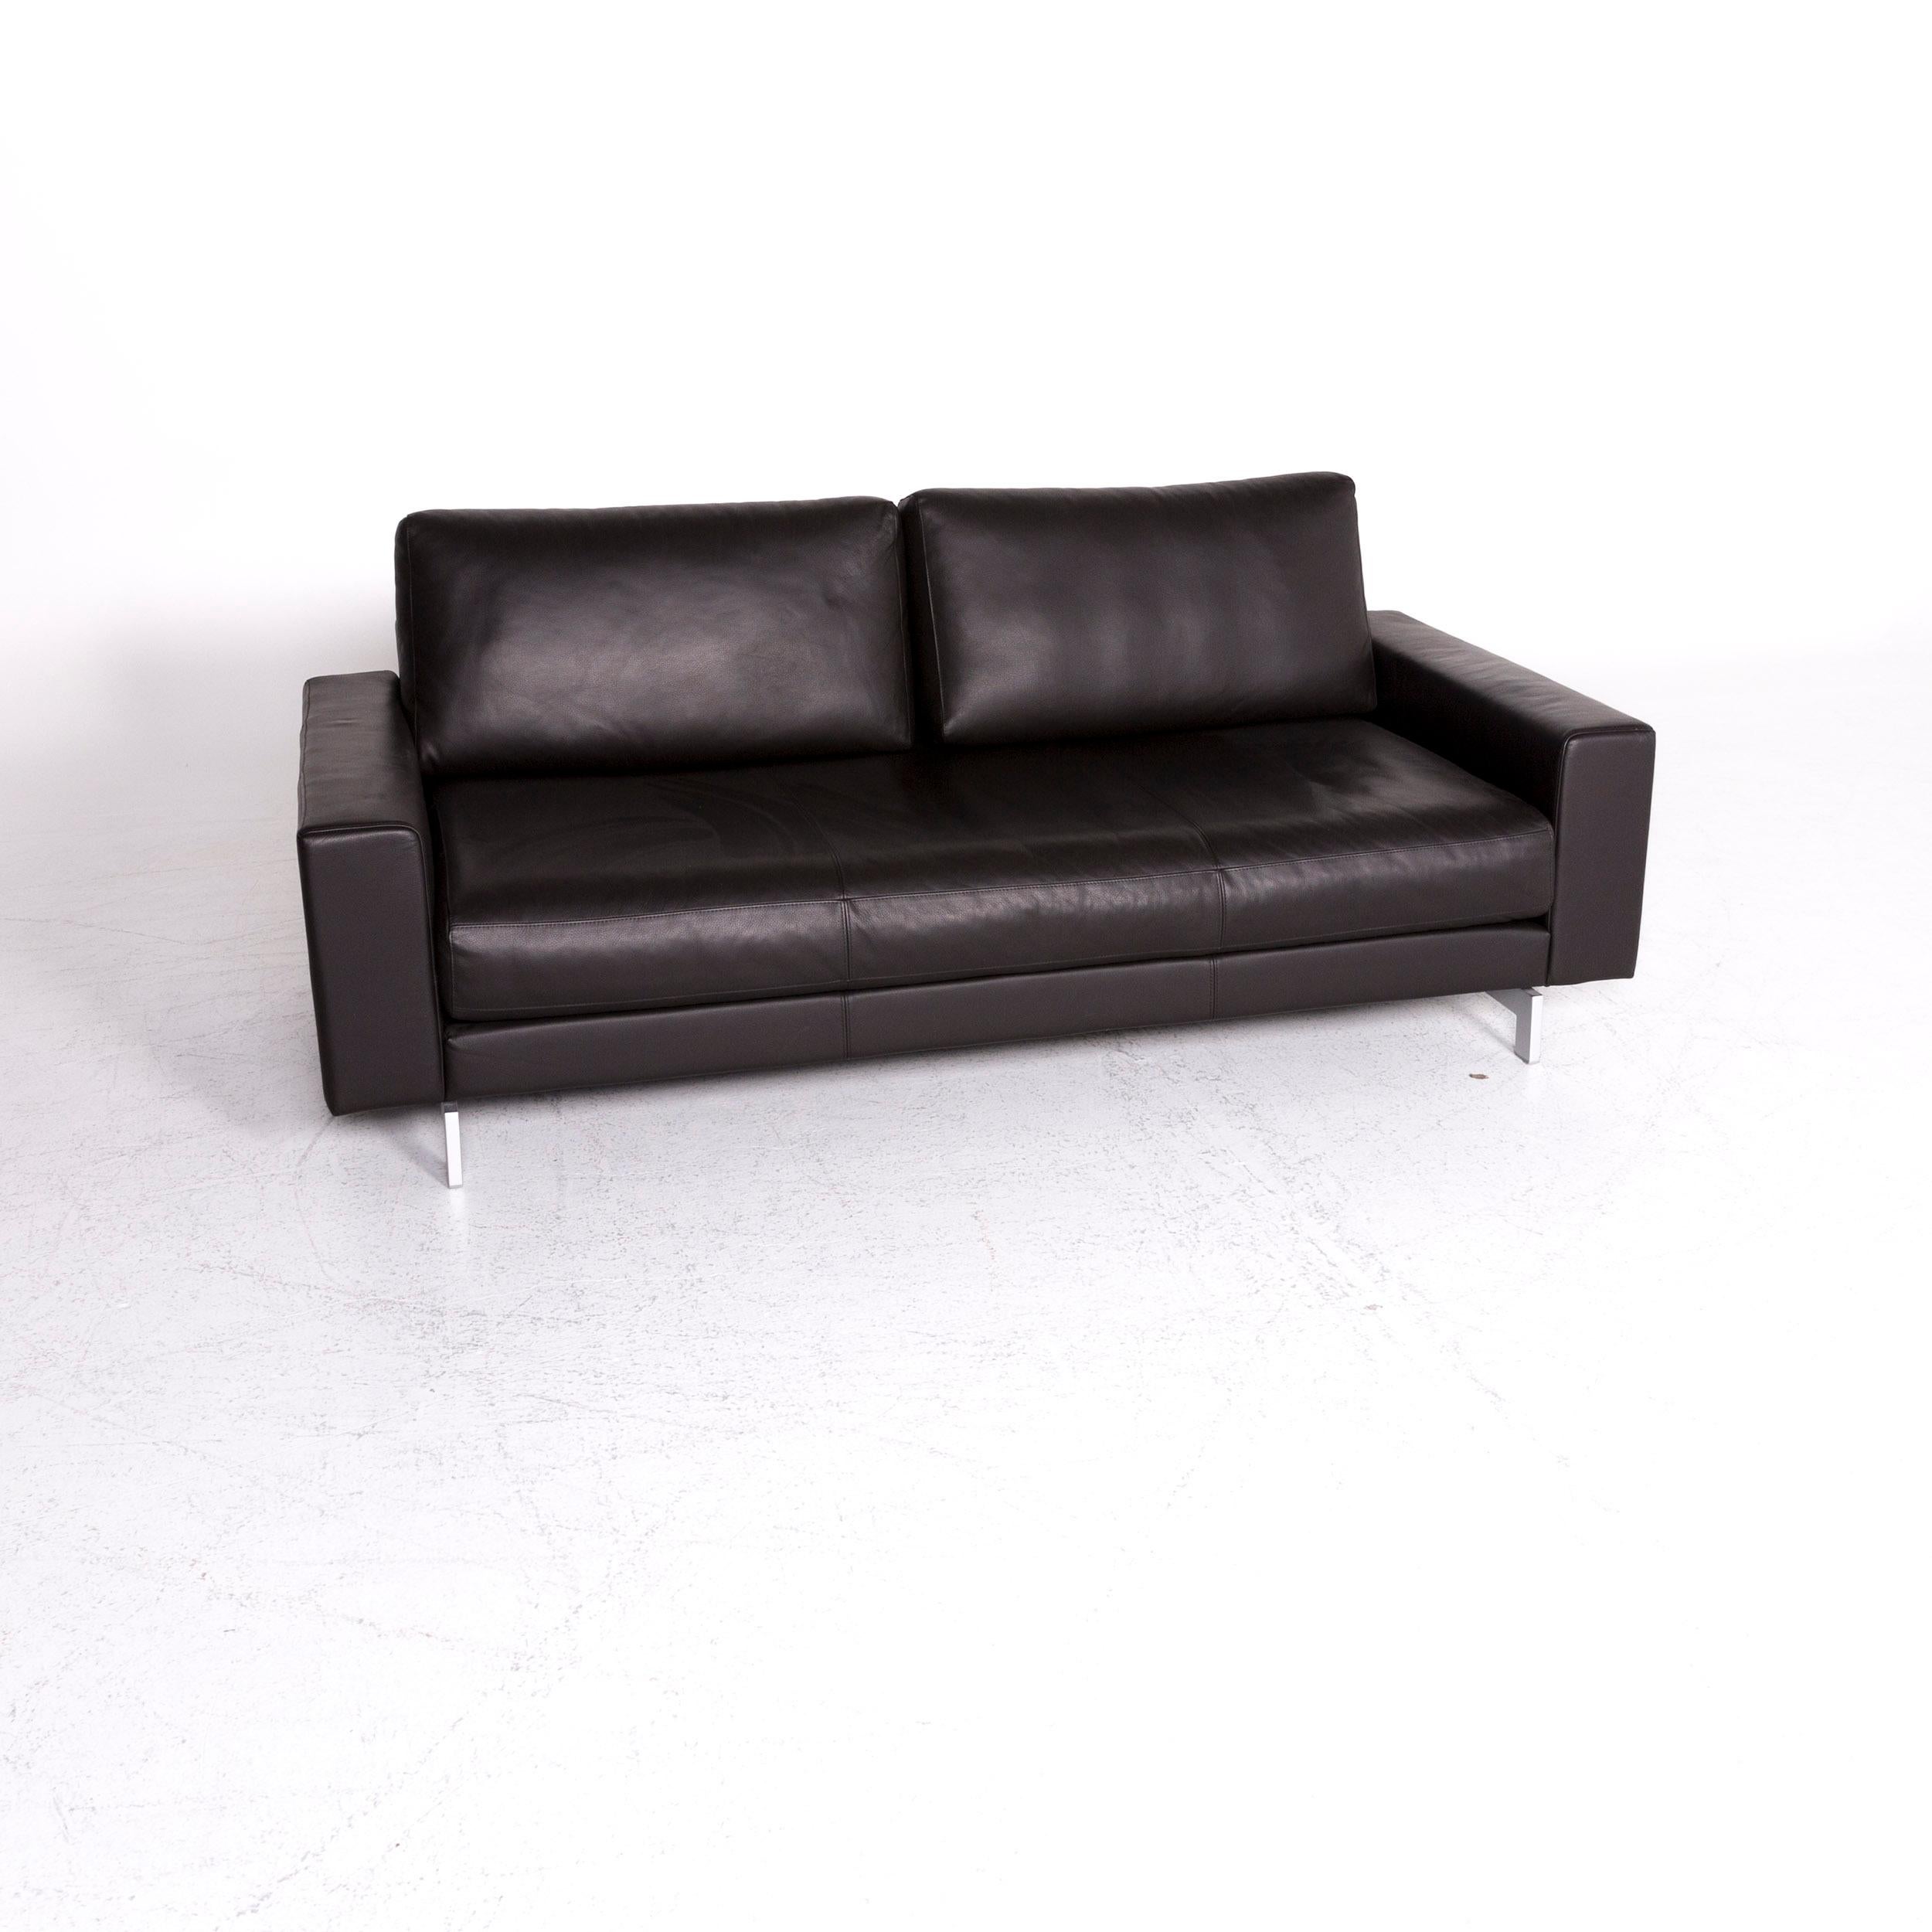 We bring to you a Rolf Benz Vida designer leather sofa brown two-seat couch. 

Product measurements in centimeters:

Depth 97
Width 200
Height 82
Seat-height 44
Rest-height 54
Seat-depth 61
Seat-width 167
Back-height 40.
     